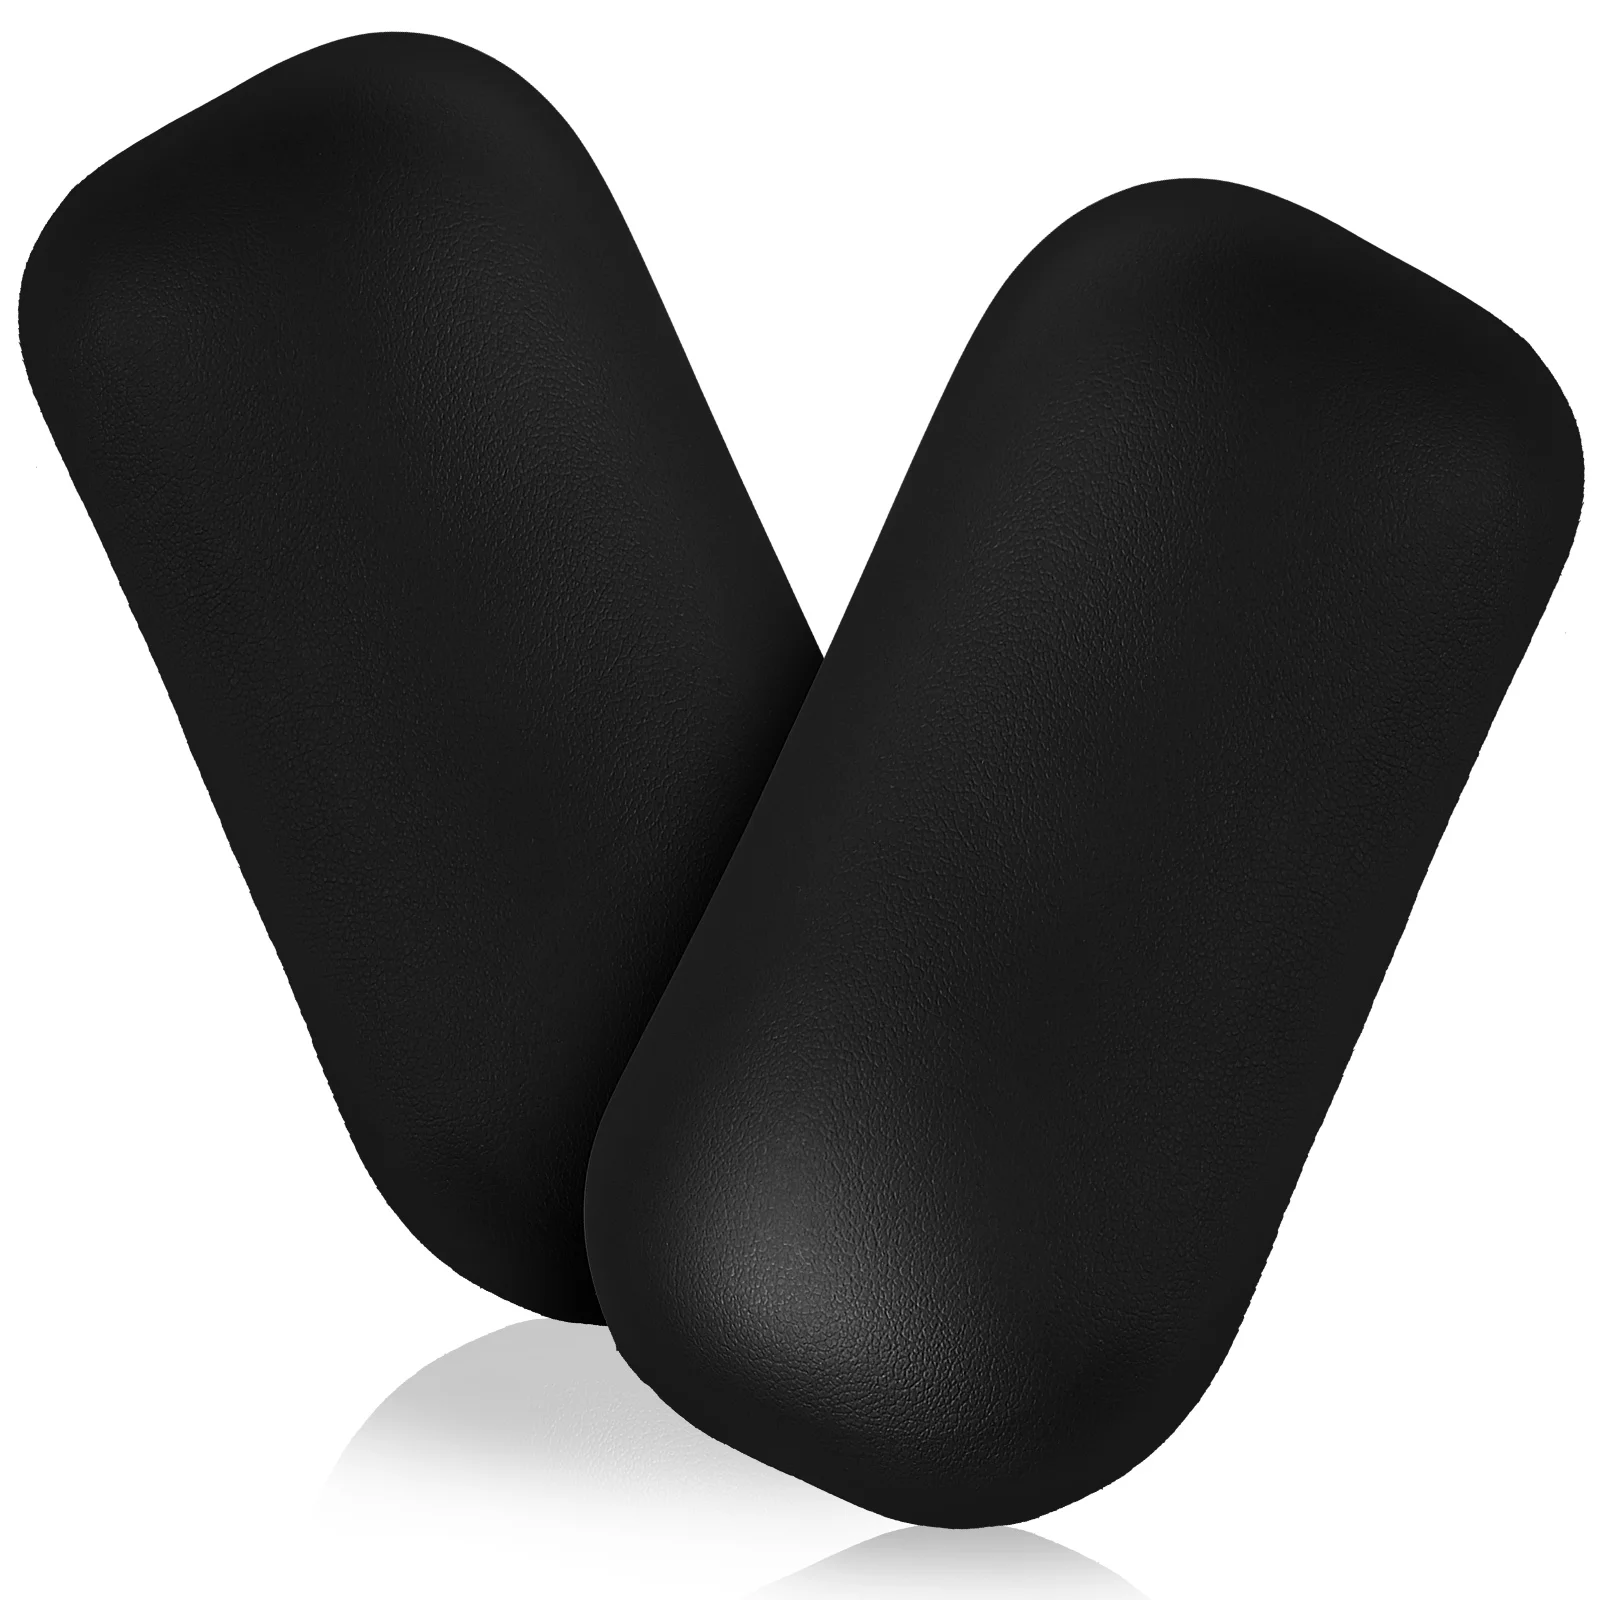 

2 Pcs Ergonomic Mouse Pads Mouse Wrist Rests Small Wrist Supports Cushions Pillows for Mouse Computer Work